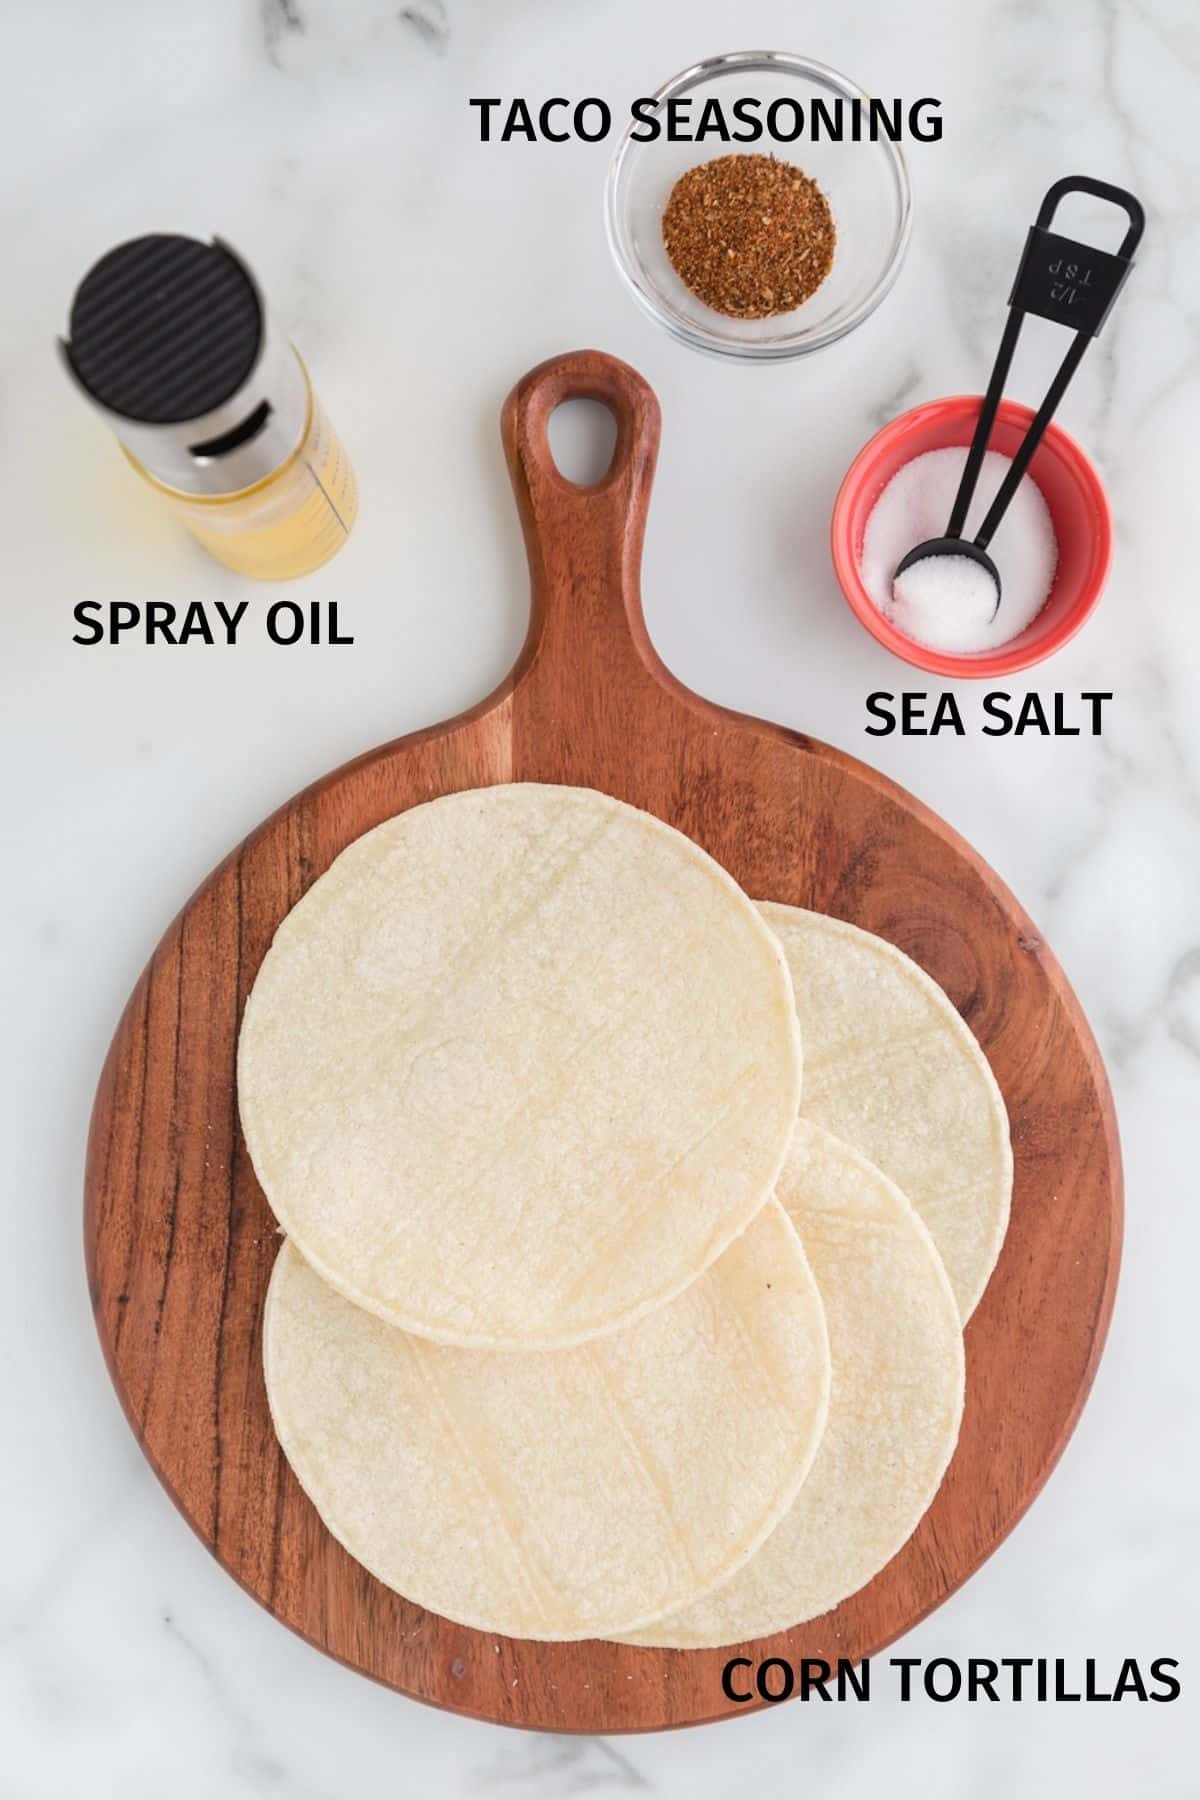 Tortillas, oil, and seasoning on a white surface.